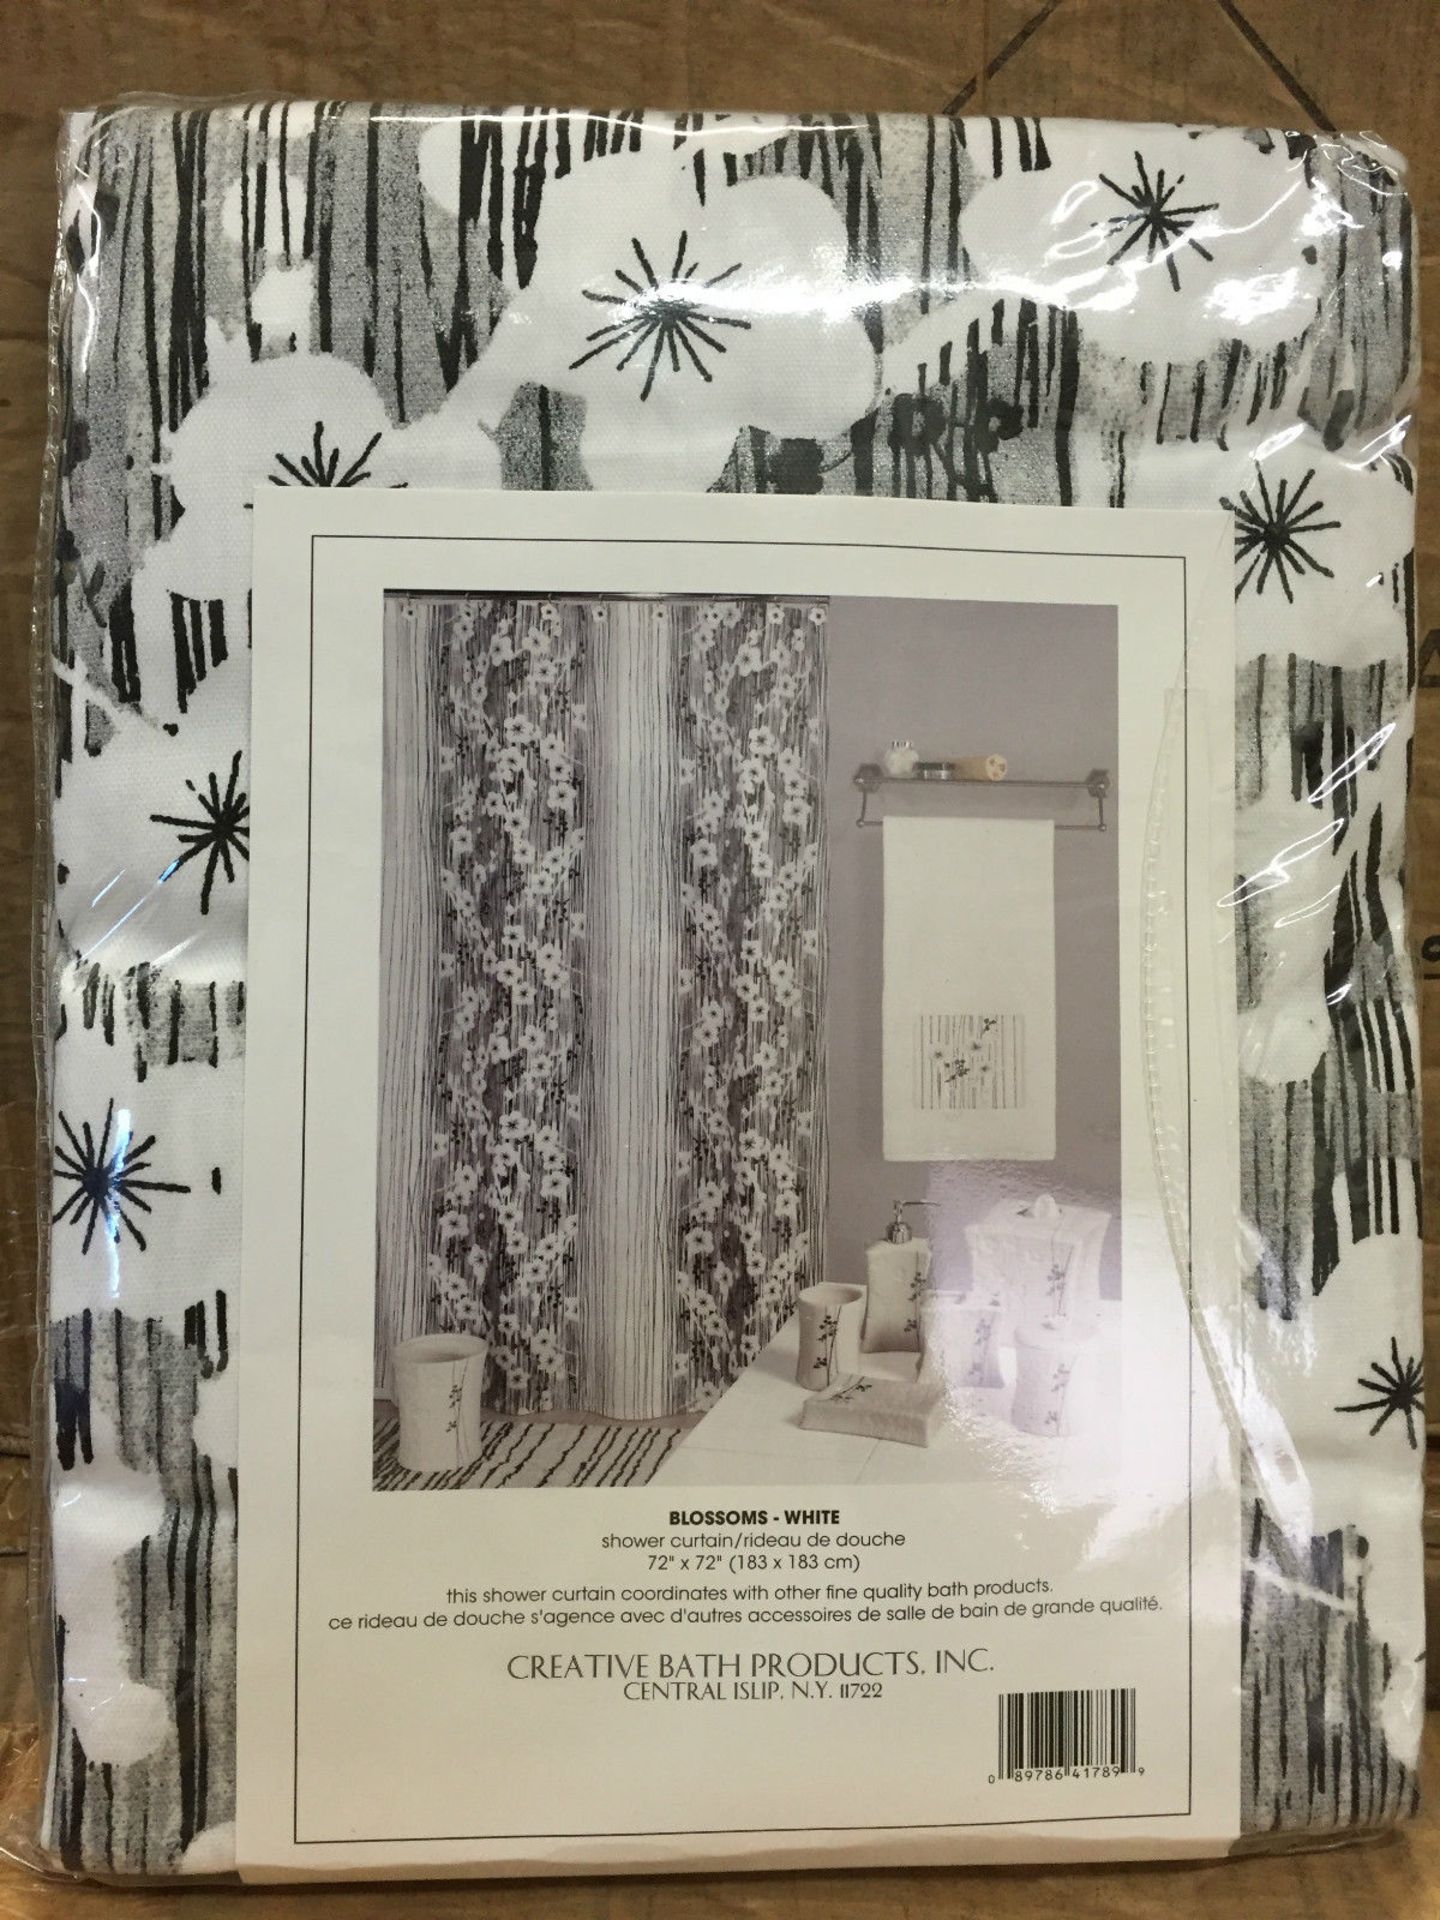 100 x Creative Bath Blossoms Shower Curtain (Black and White) 72 x 72 Retail $49.99 - Image 3 of 3